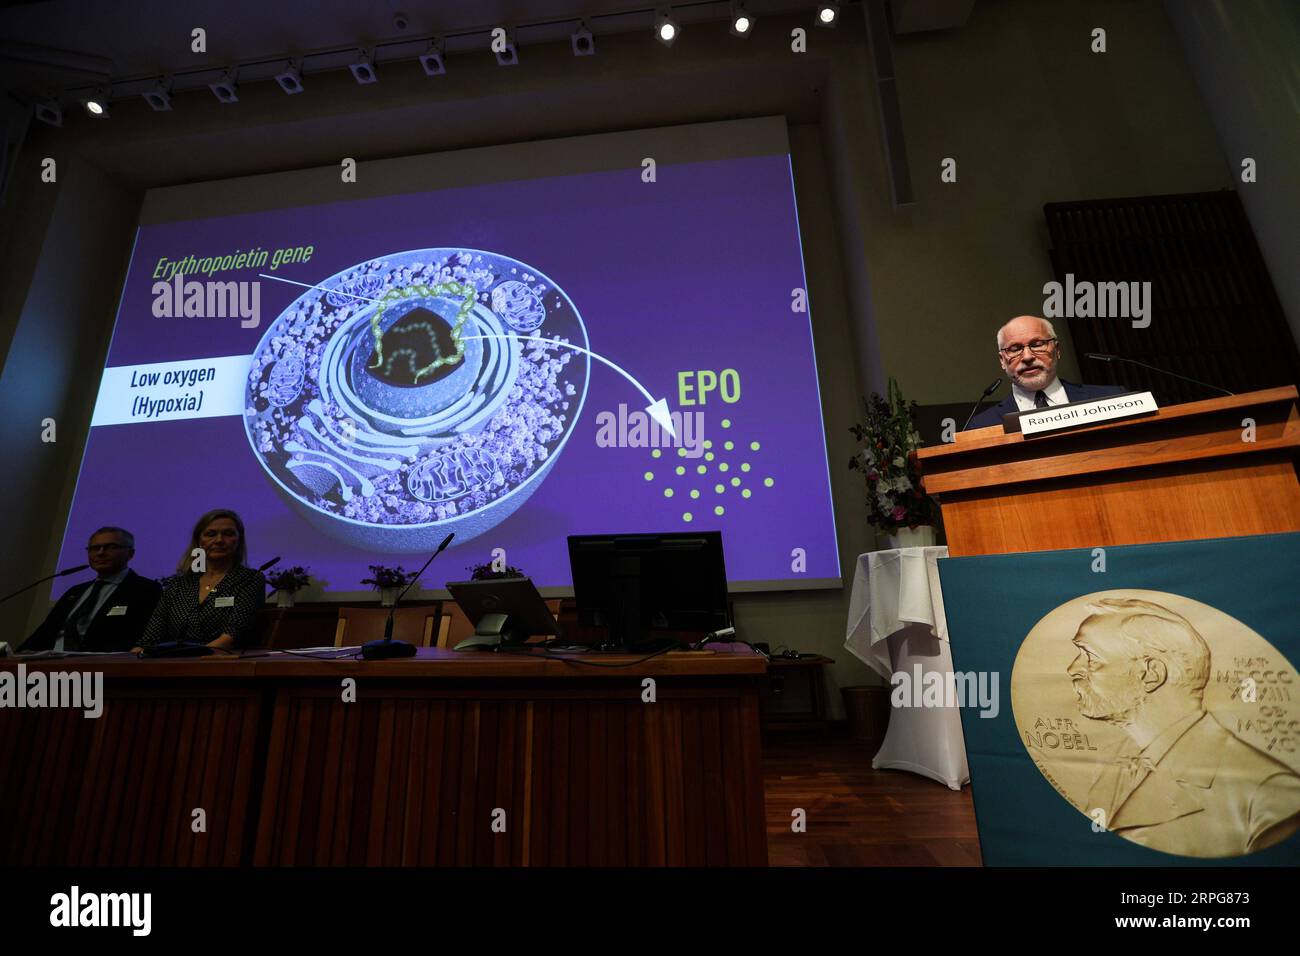 191007 -- STOCKHOLM, Oct. 7, 2019 -- Photo taken on Oct. 7, 2019 shows the announcement of the 2019 Nobel Prize in Physiology or Medicine at the Karolinska Institute in Stockholm, Sweden, Oct. 7, 2019. The prize was awarded jointly to William G. Kaelin Jr, Peter J. Ratcliffe and Gregg L. Semenza for their discoveries of how cells sense and adapt to oxygen availability, said the Nobel Assembly at the Karolinska Institute.  SWEDEN-STOCKHOLM-2019 NOBEL PRIZE ANNOUNCEMENT-PHYSIOLOGY OR MEDICINE ZhengxHuansong PUBLICATIONxNOTxINxCHN Stock Photo